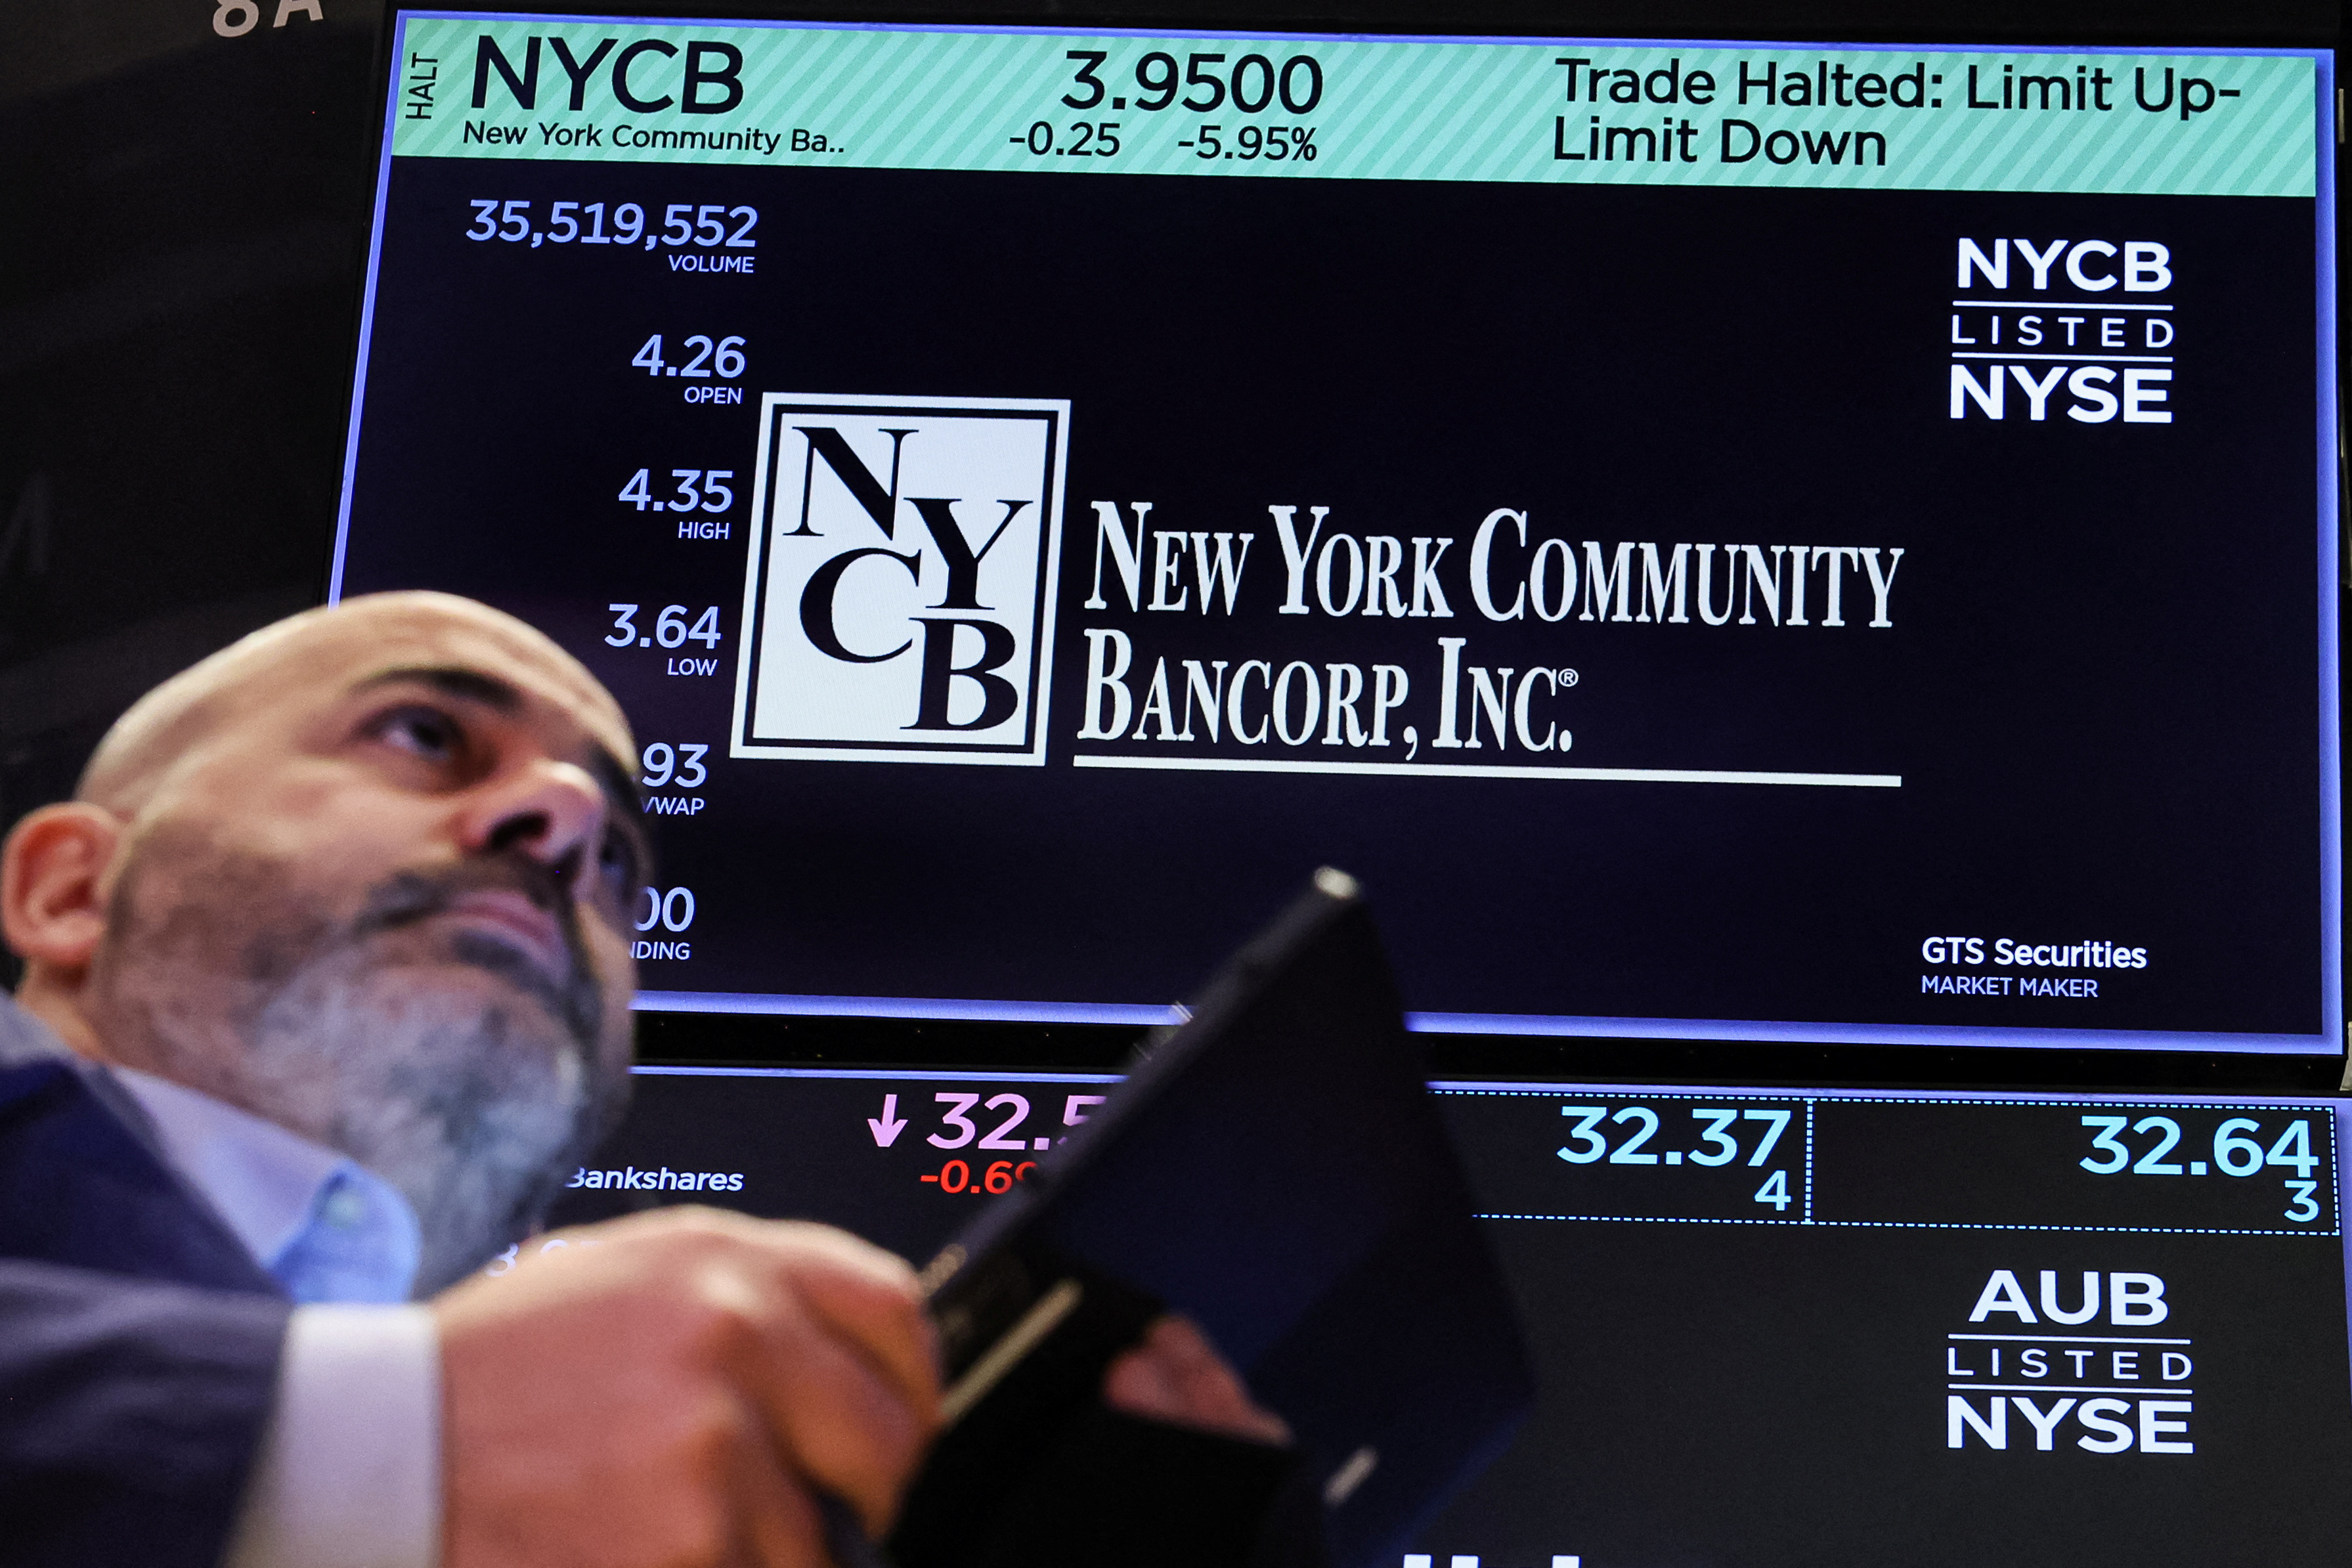 A trader works at the post where New York Community Bancorp stock is traded on the floor at the NYSE in New York